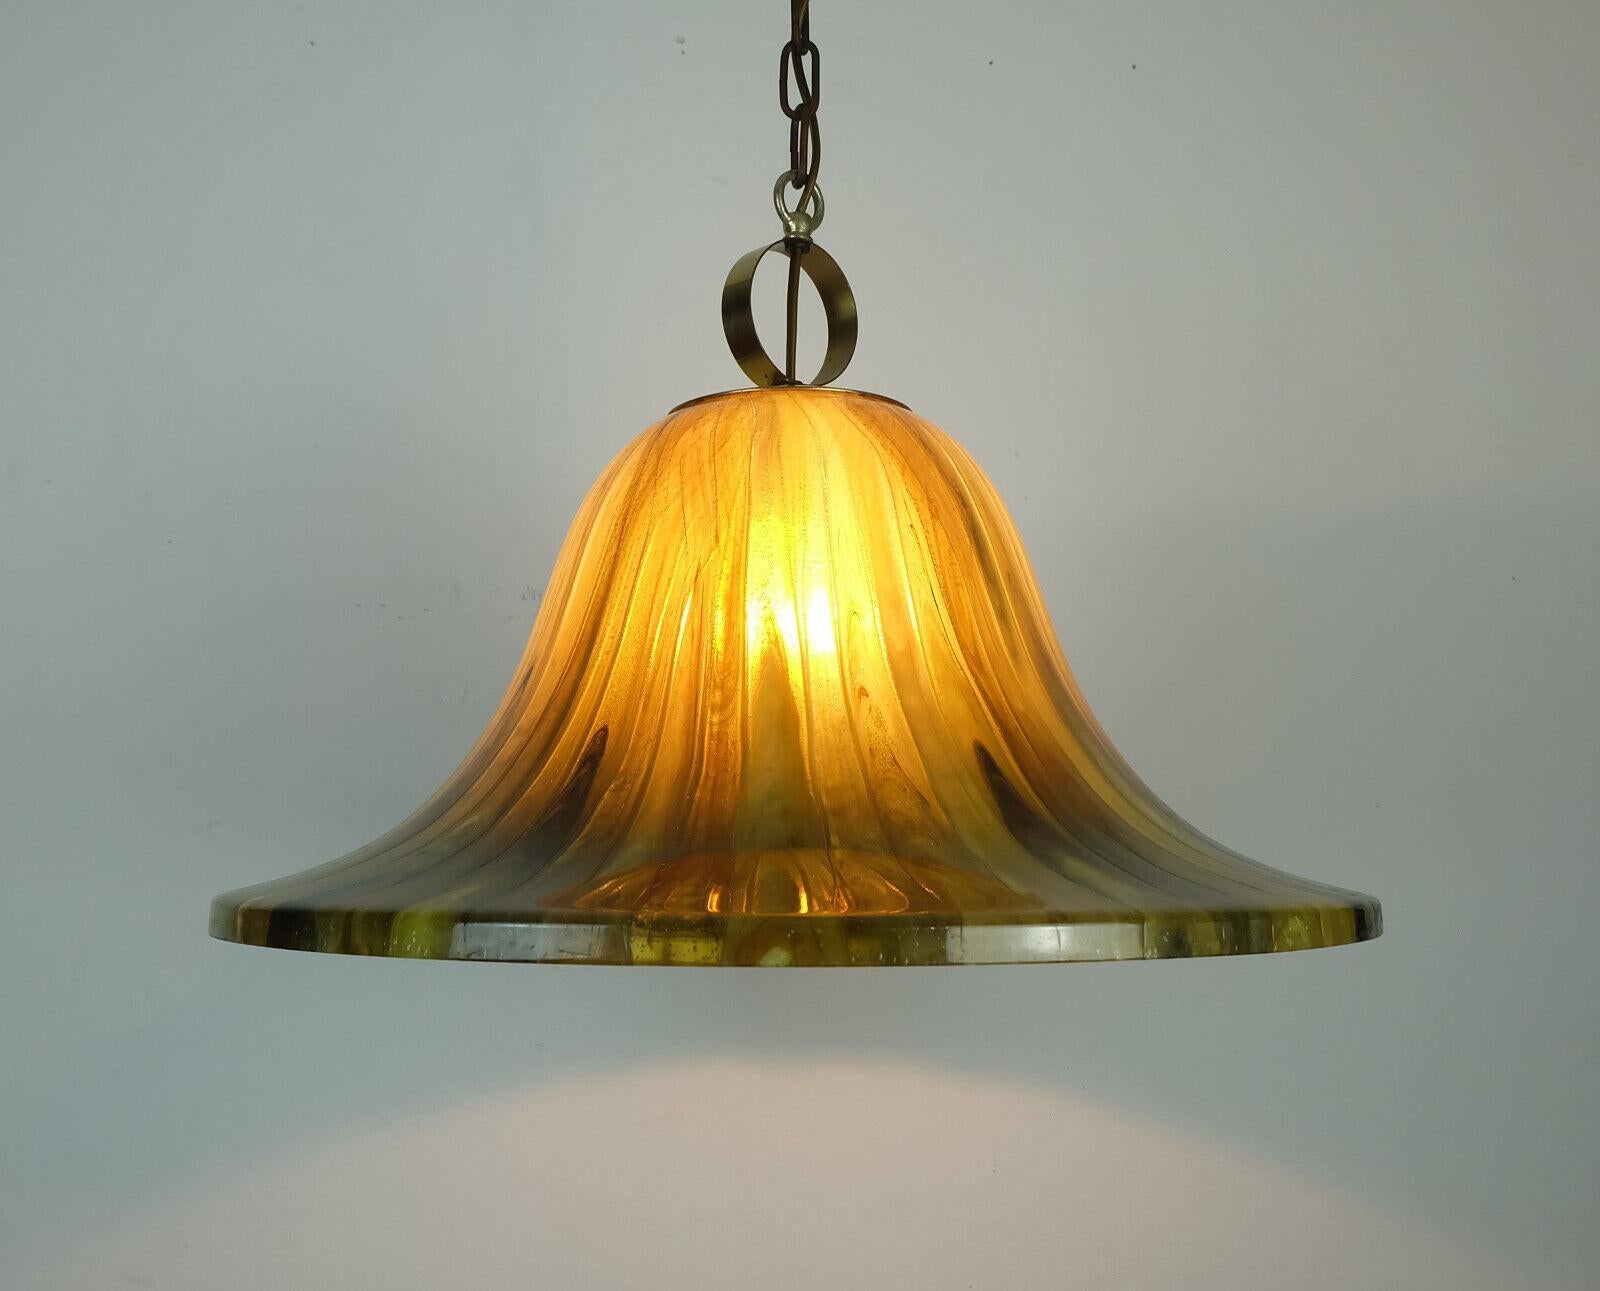 Impressive 1970s pendant light made of amber color acrylic and brass. For 1 bulb with E27 socket. 

Dimensions in cm:
Overall length 105 cm, diameter shade 51 cm, height shade 27 cm.

Dimensions in inches:
Overall length 41.33